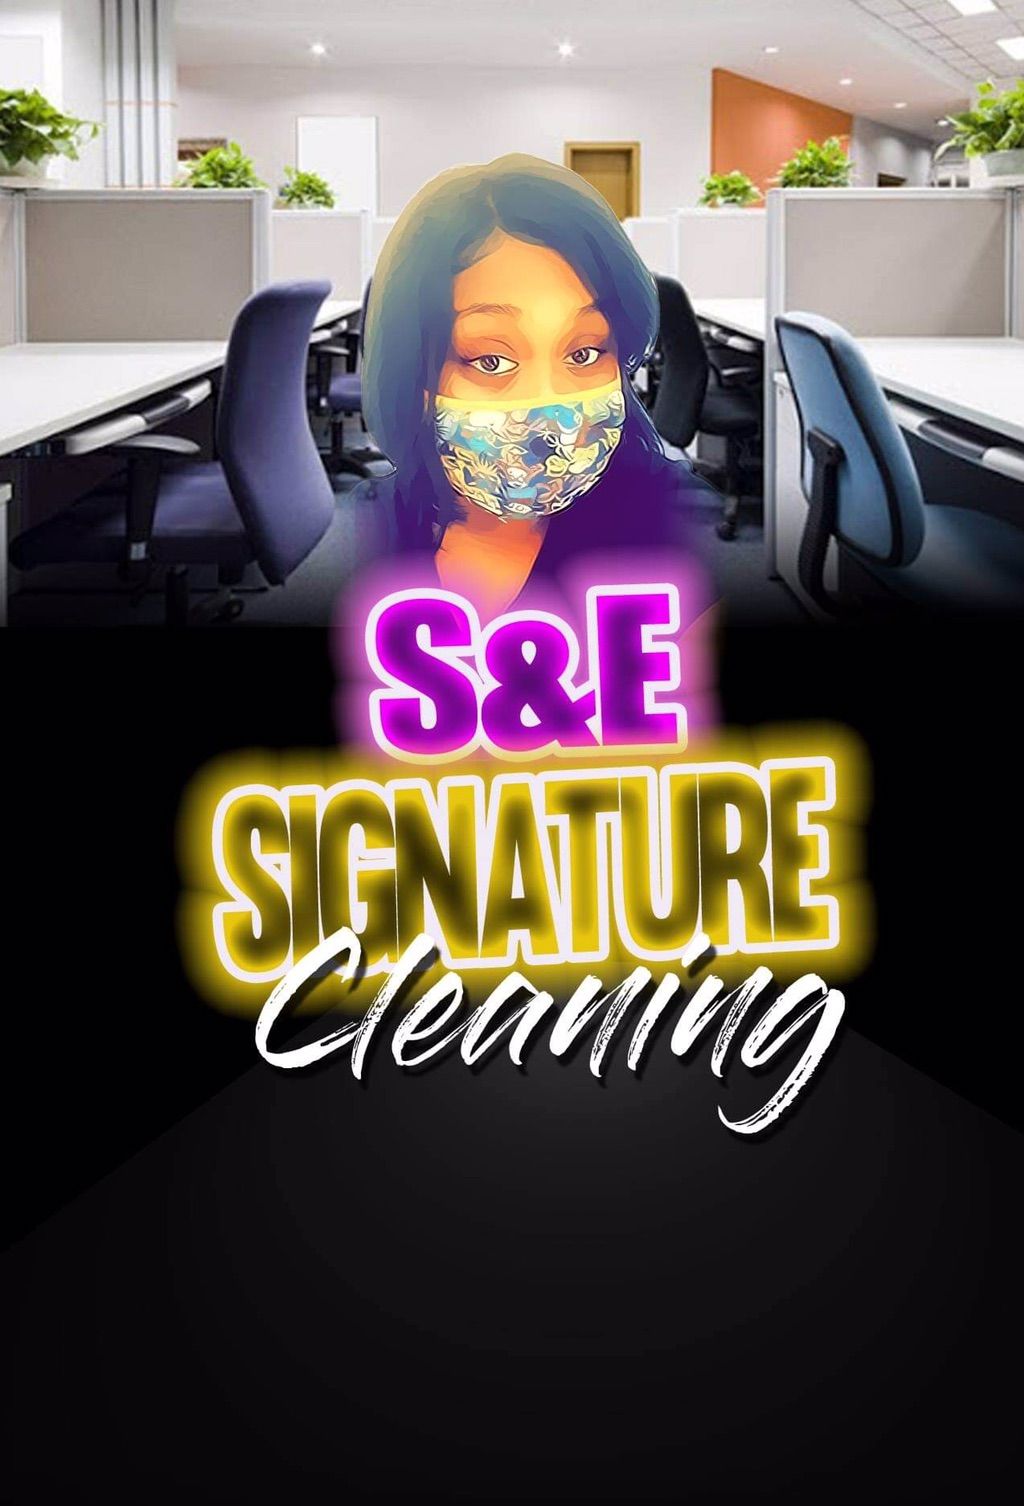 S & E Signature Cleaning